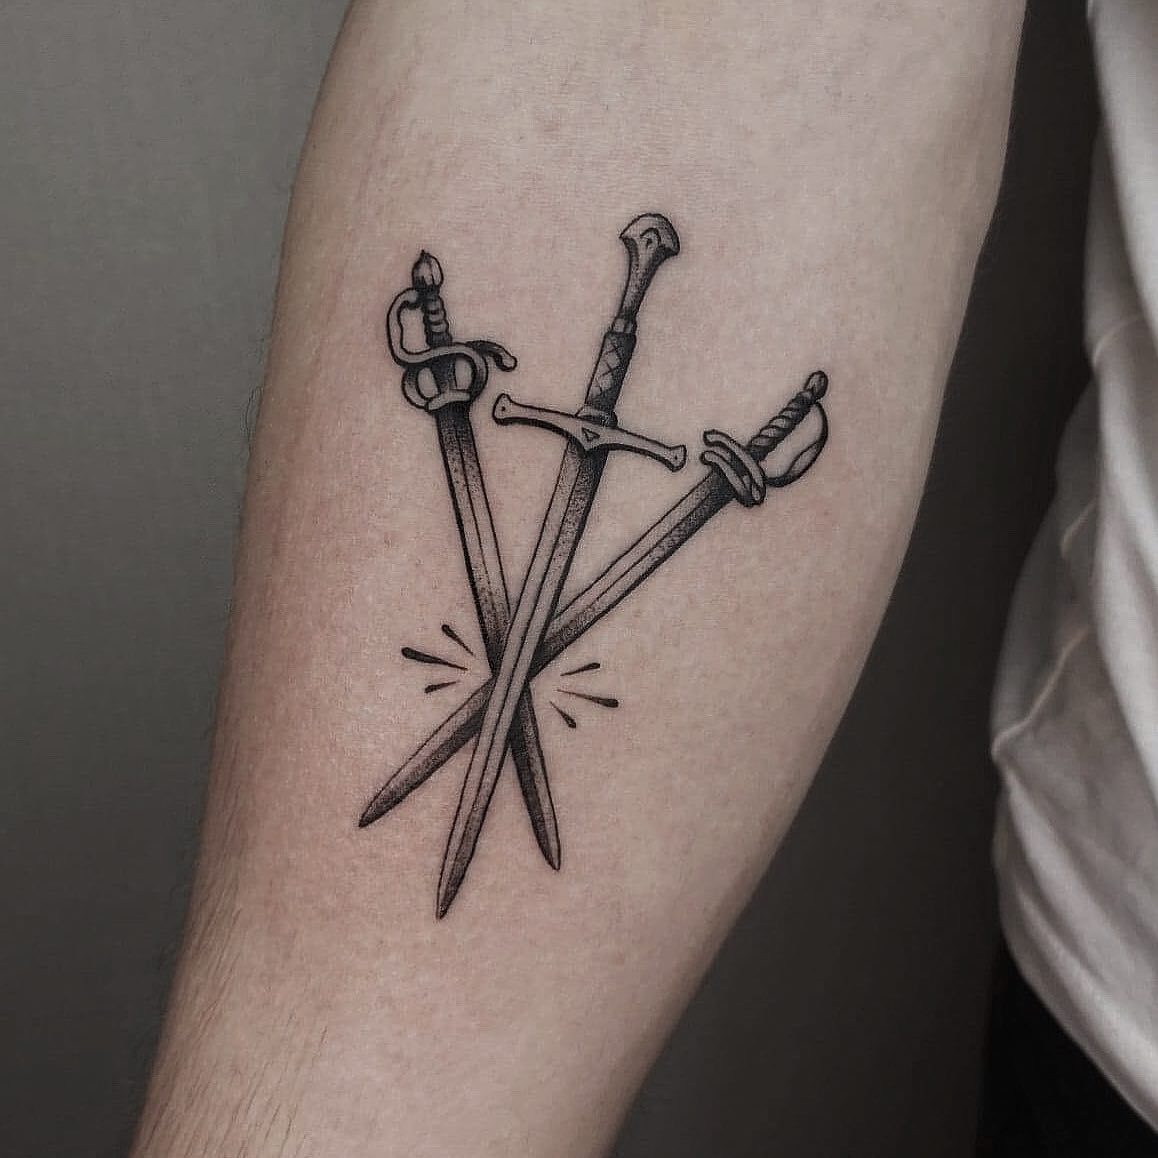 Swords for Cameron representing his brothers and him. Big thanks for the trust and the cool request!

bishoprotary studioxiiigallery allegoryink tattoolifemagazine 

